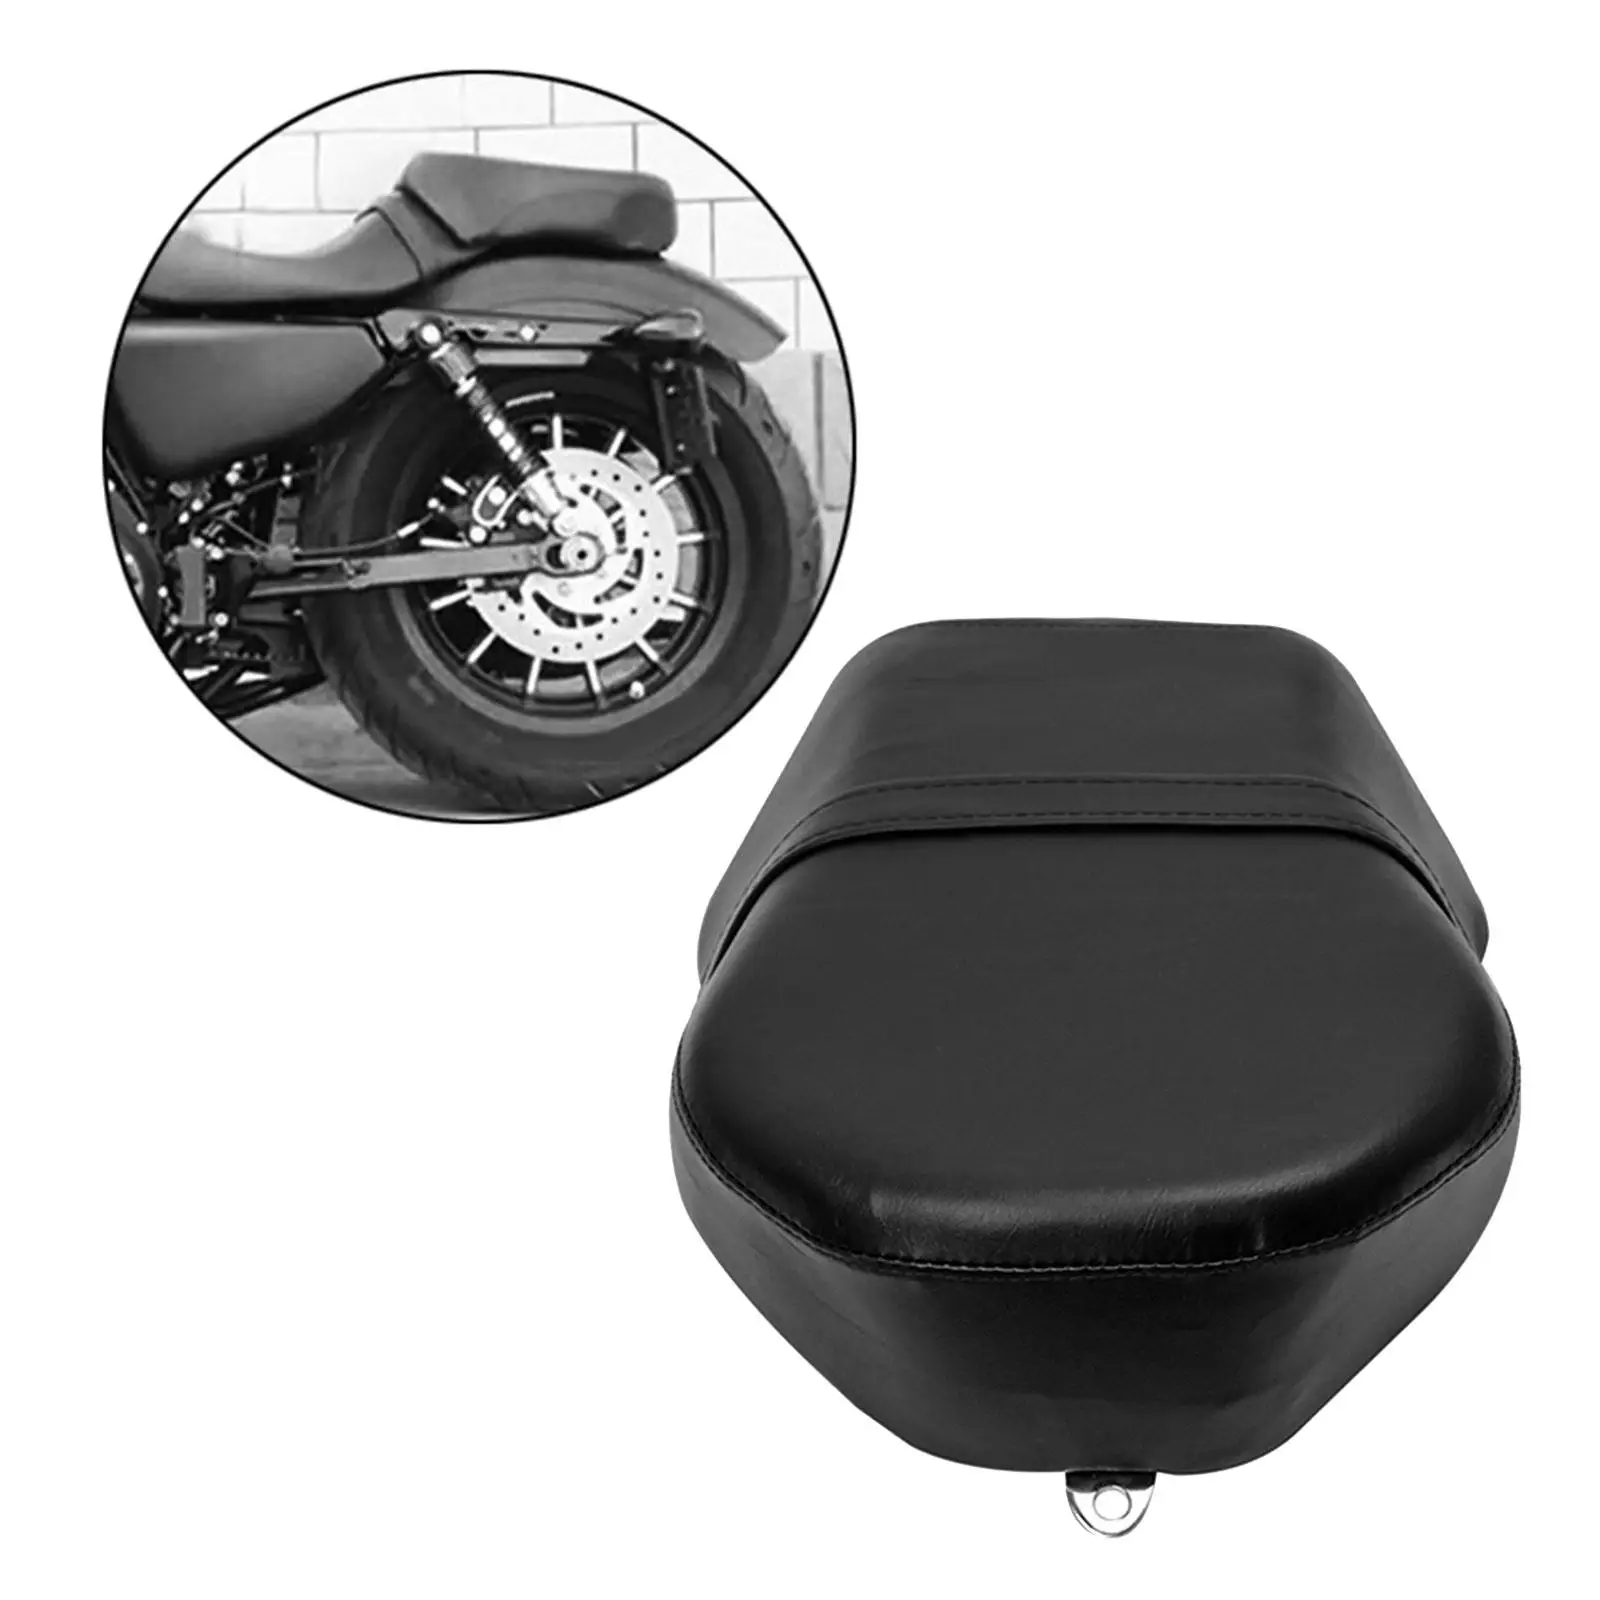 Motorcycle Pillion Passenger Pad Seat Rear Cushion for Harley Sportster 883 1200